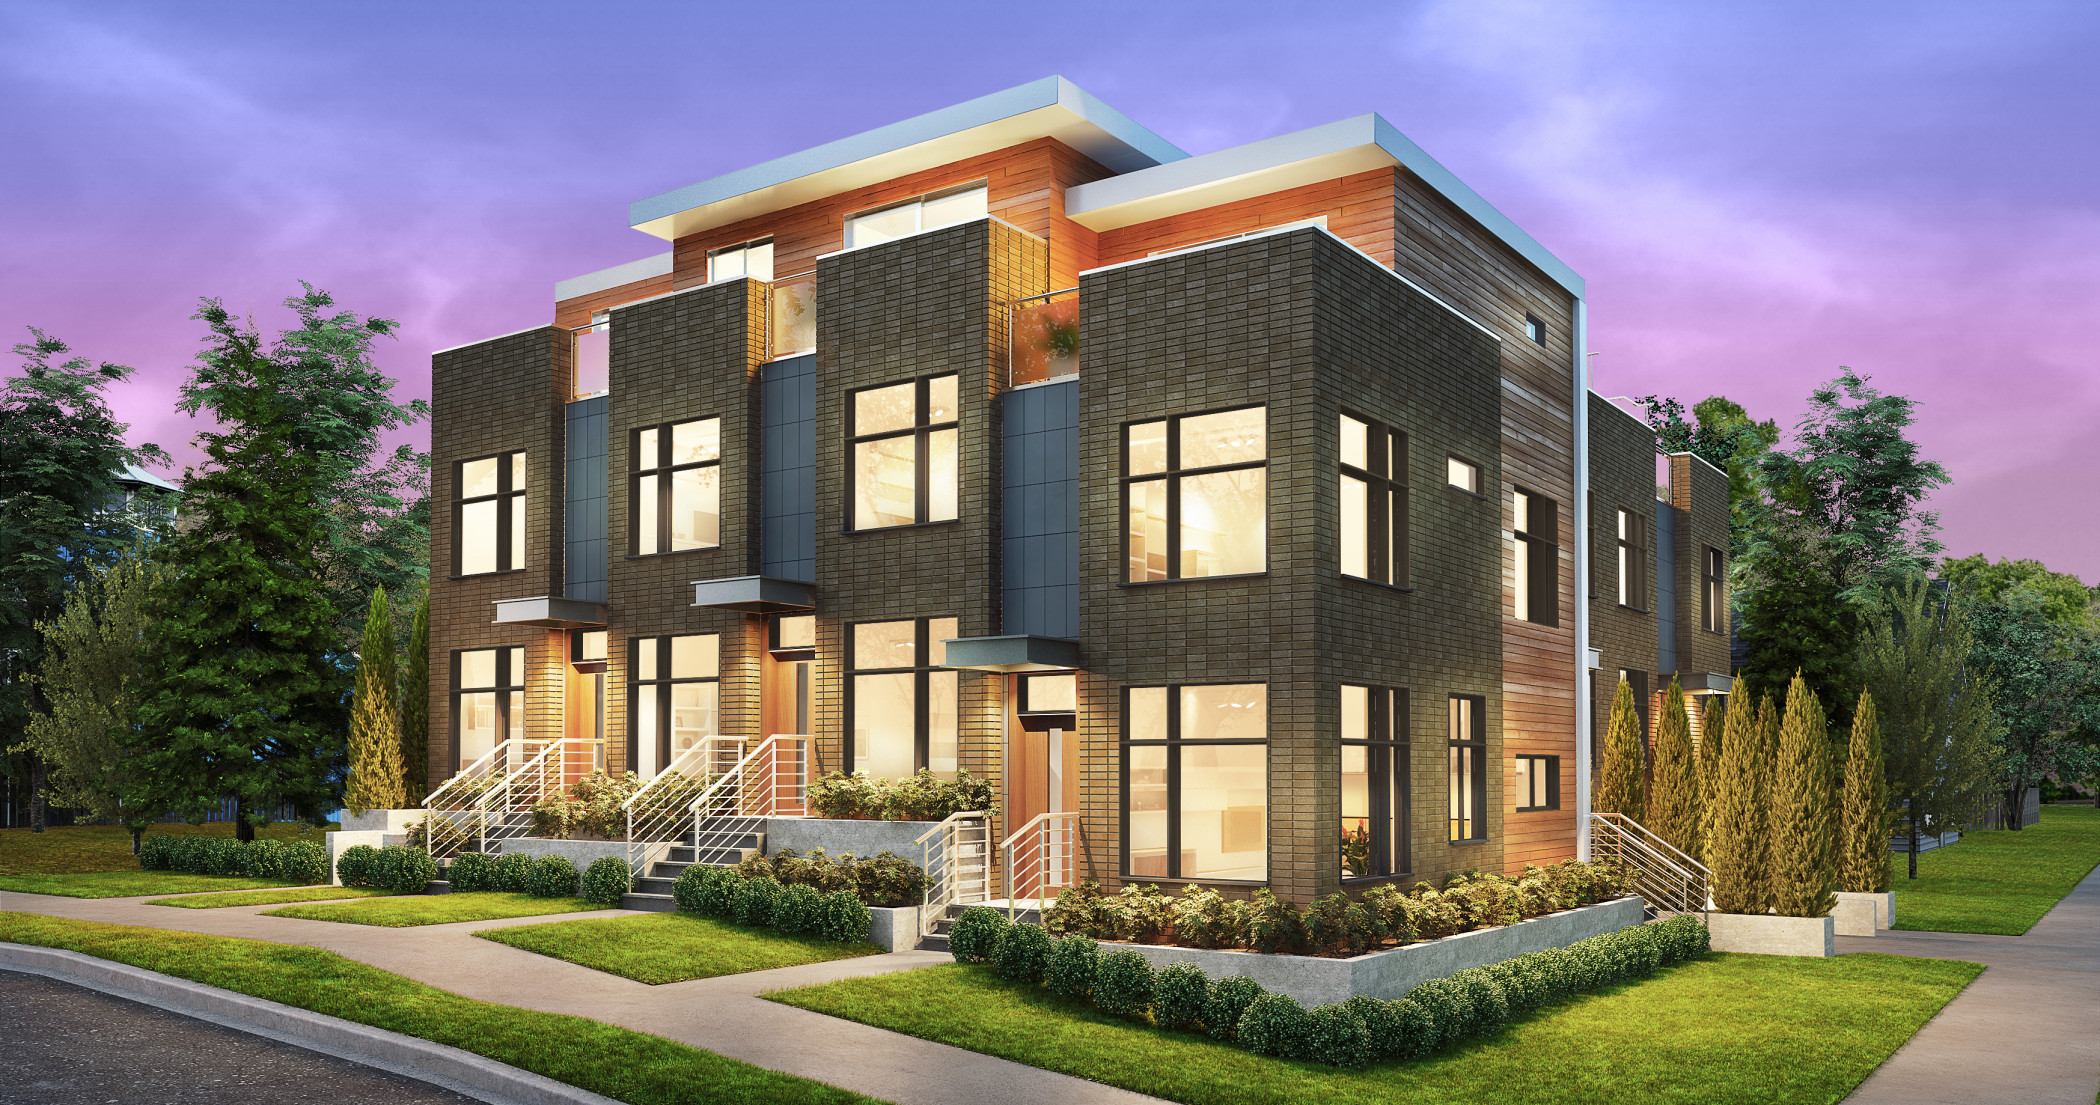 Exterior rendering of Monogram by Alliance Partners.